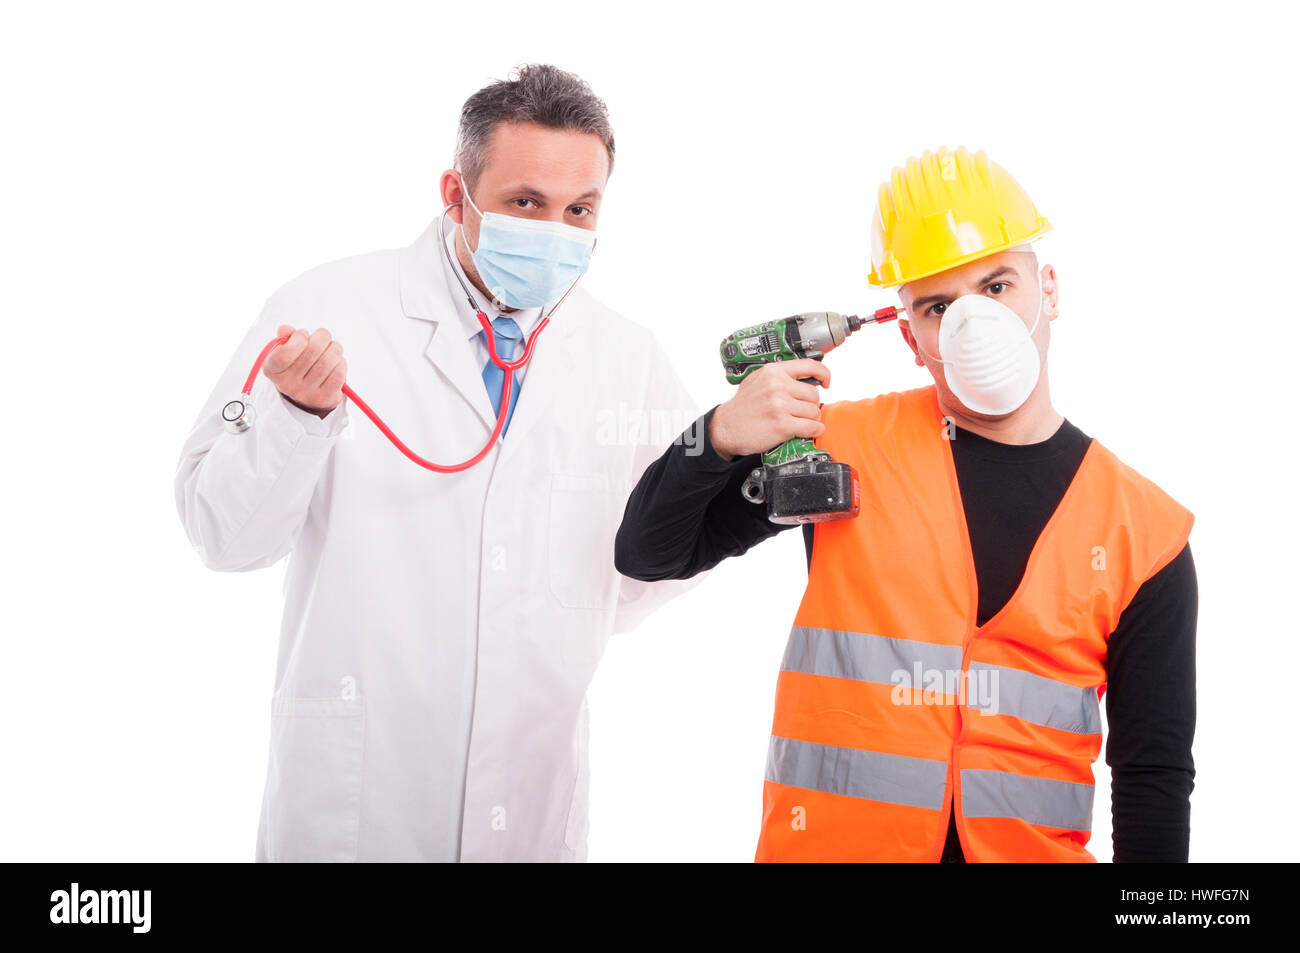 Silly doctor and constructor playing with their tools stethoscope and drill isolated on white background Stock Photo